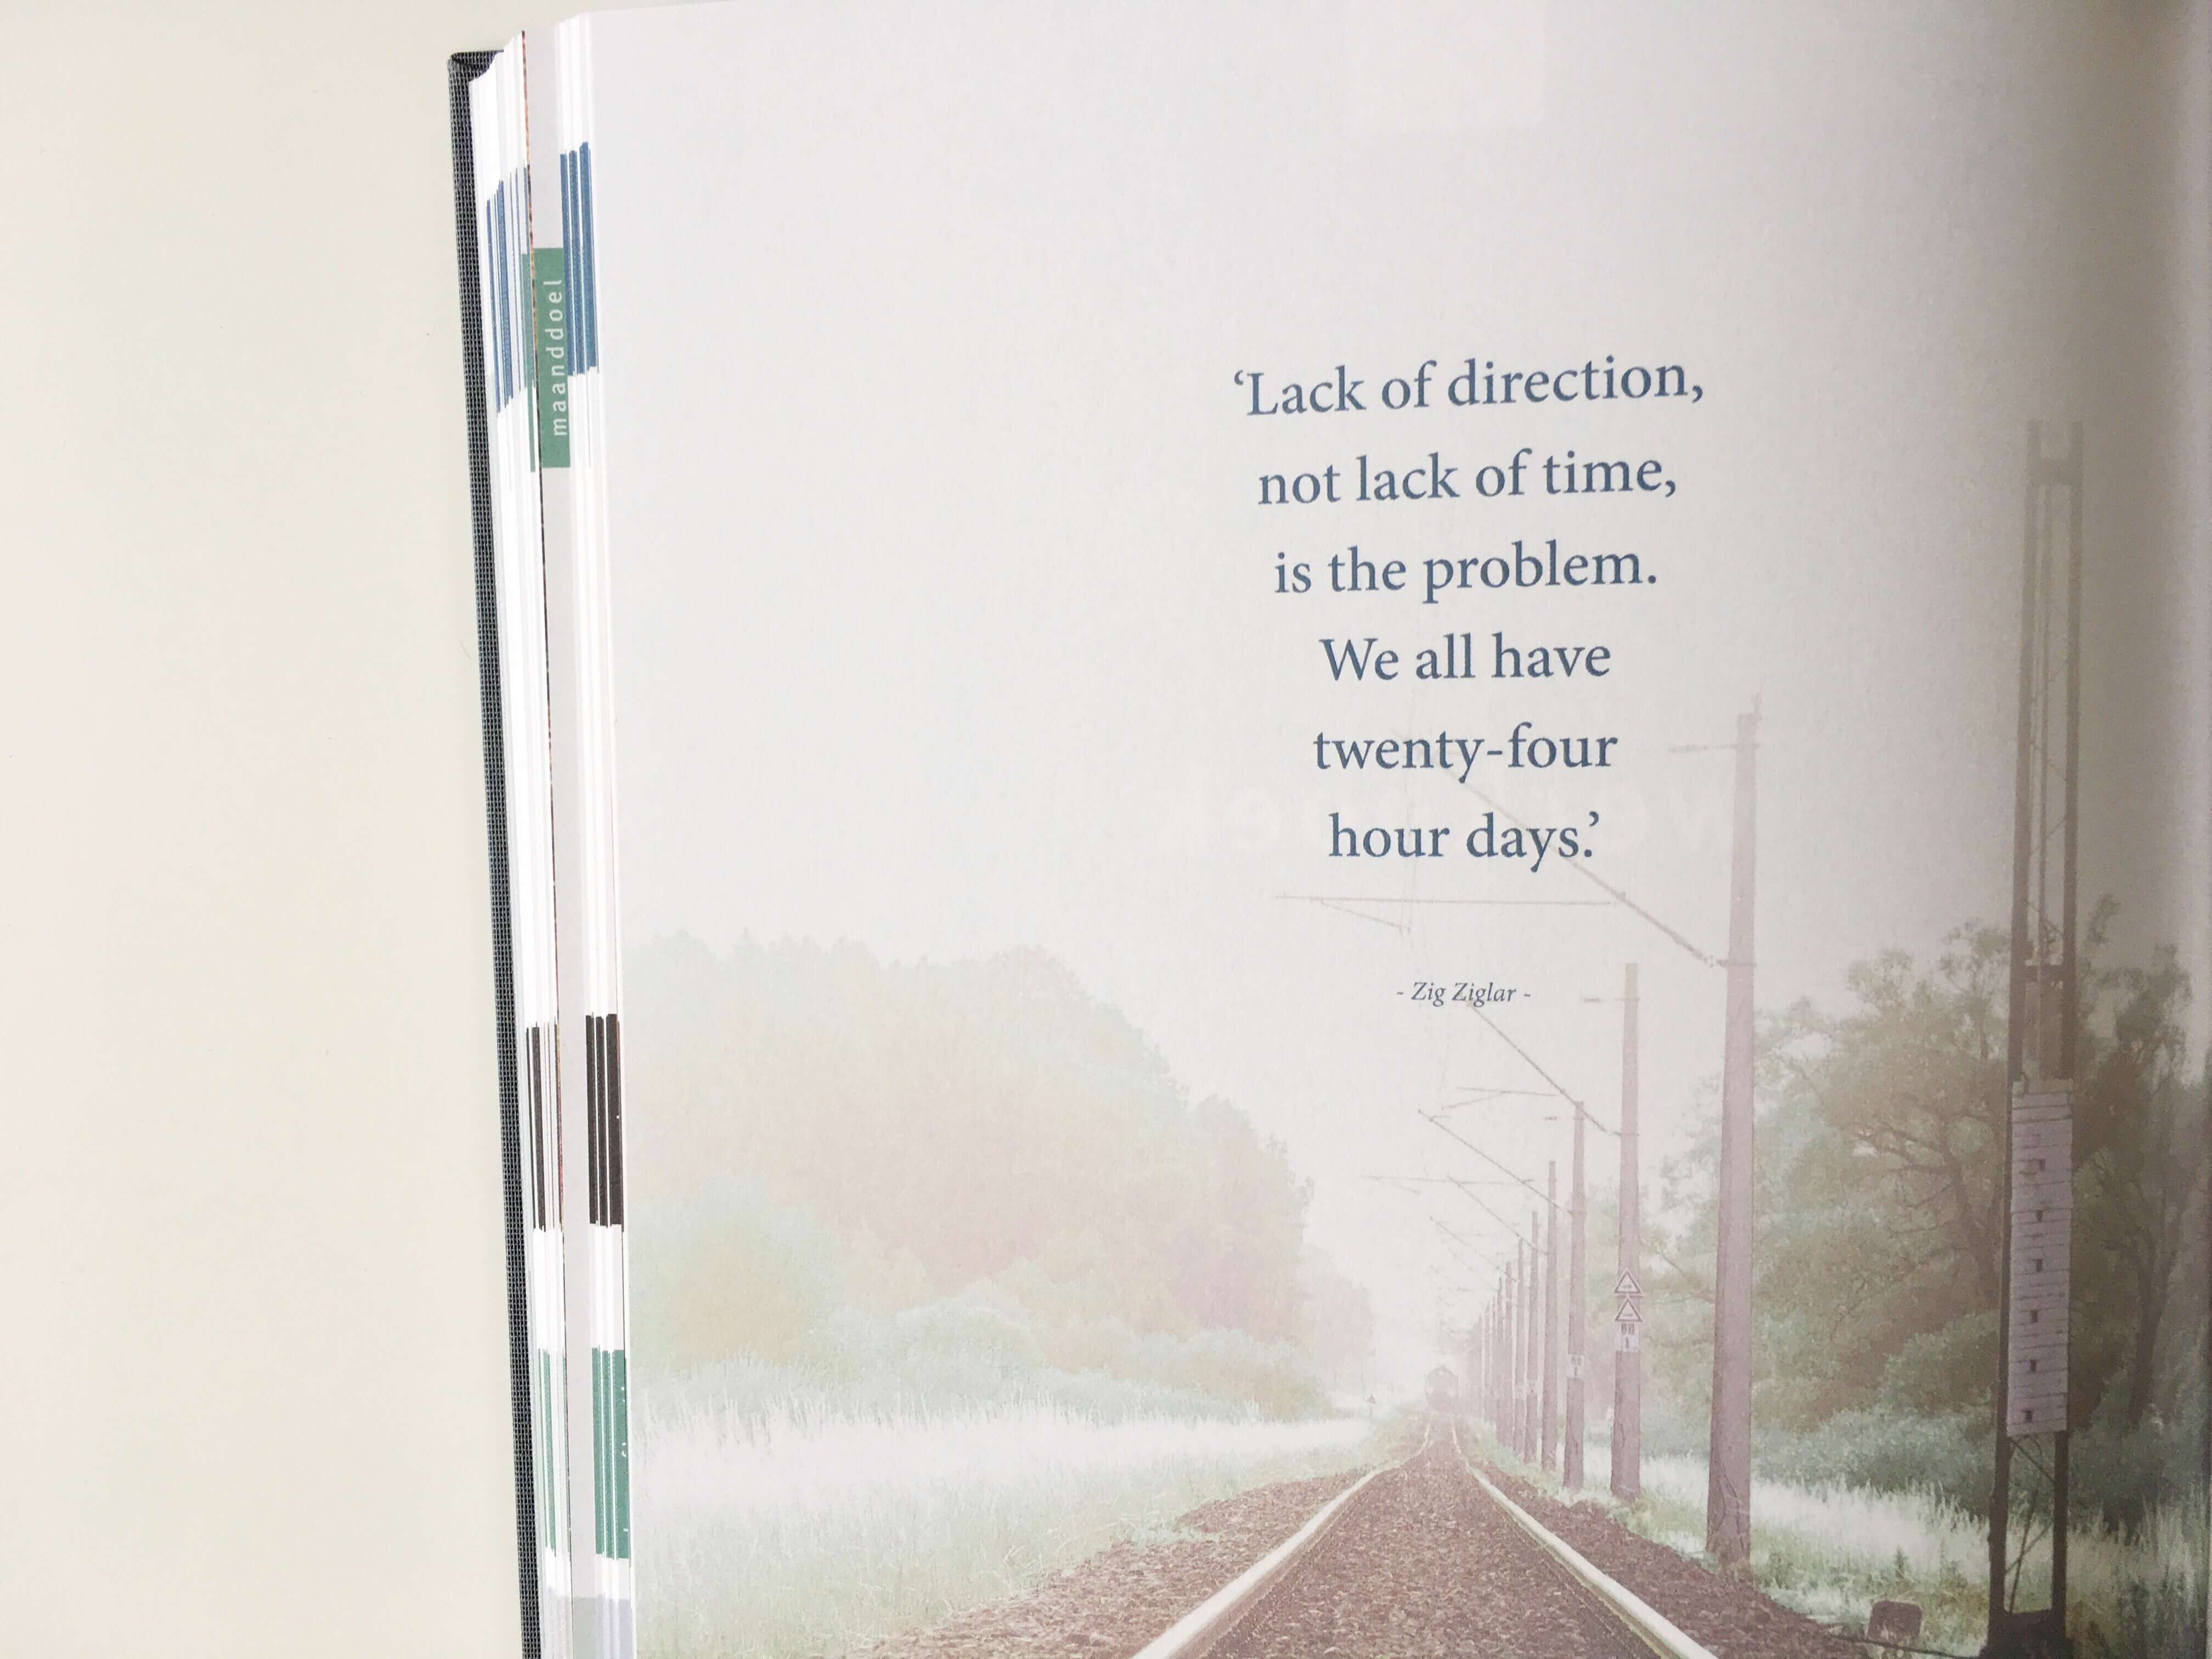 Zih ziglar - lack of direction not lack of time is the problem we all have twenty-four hour days